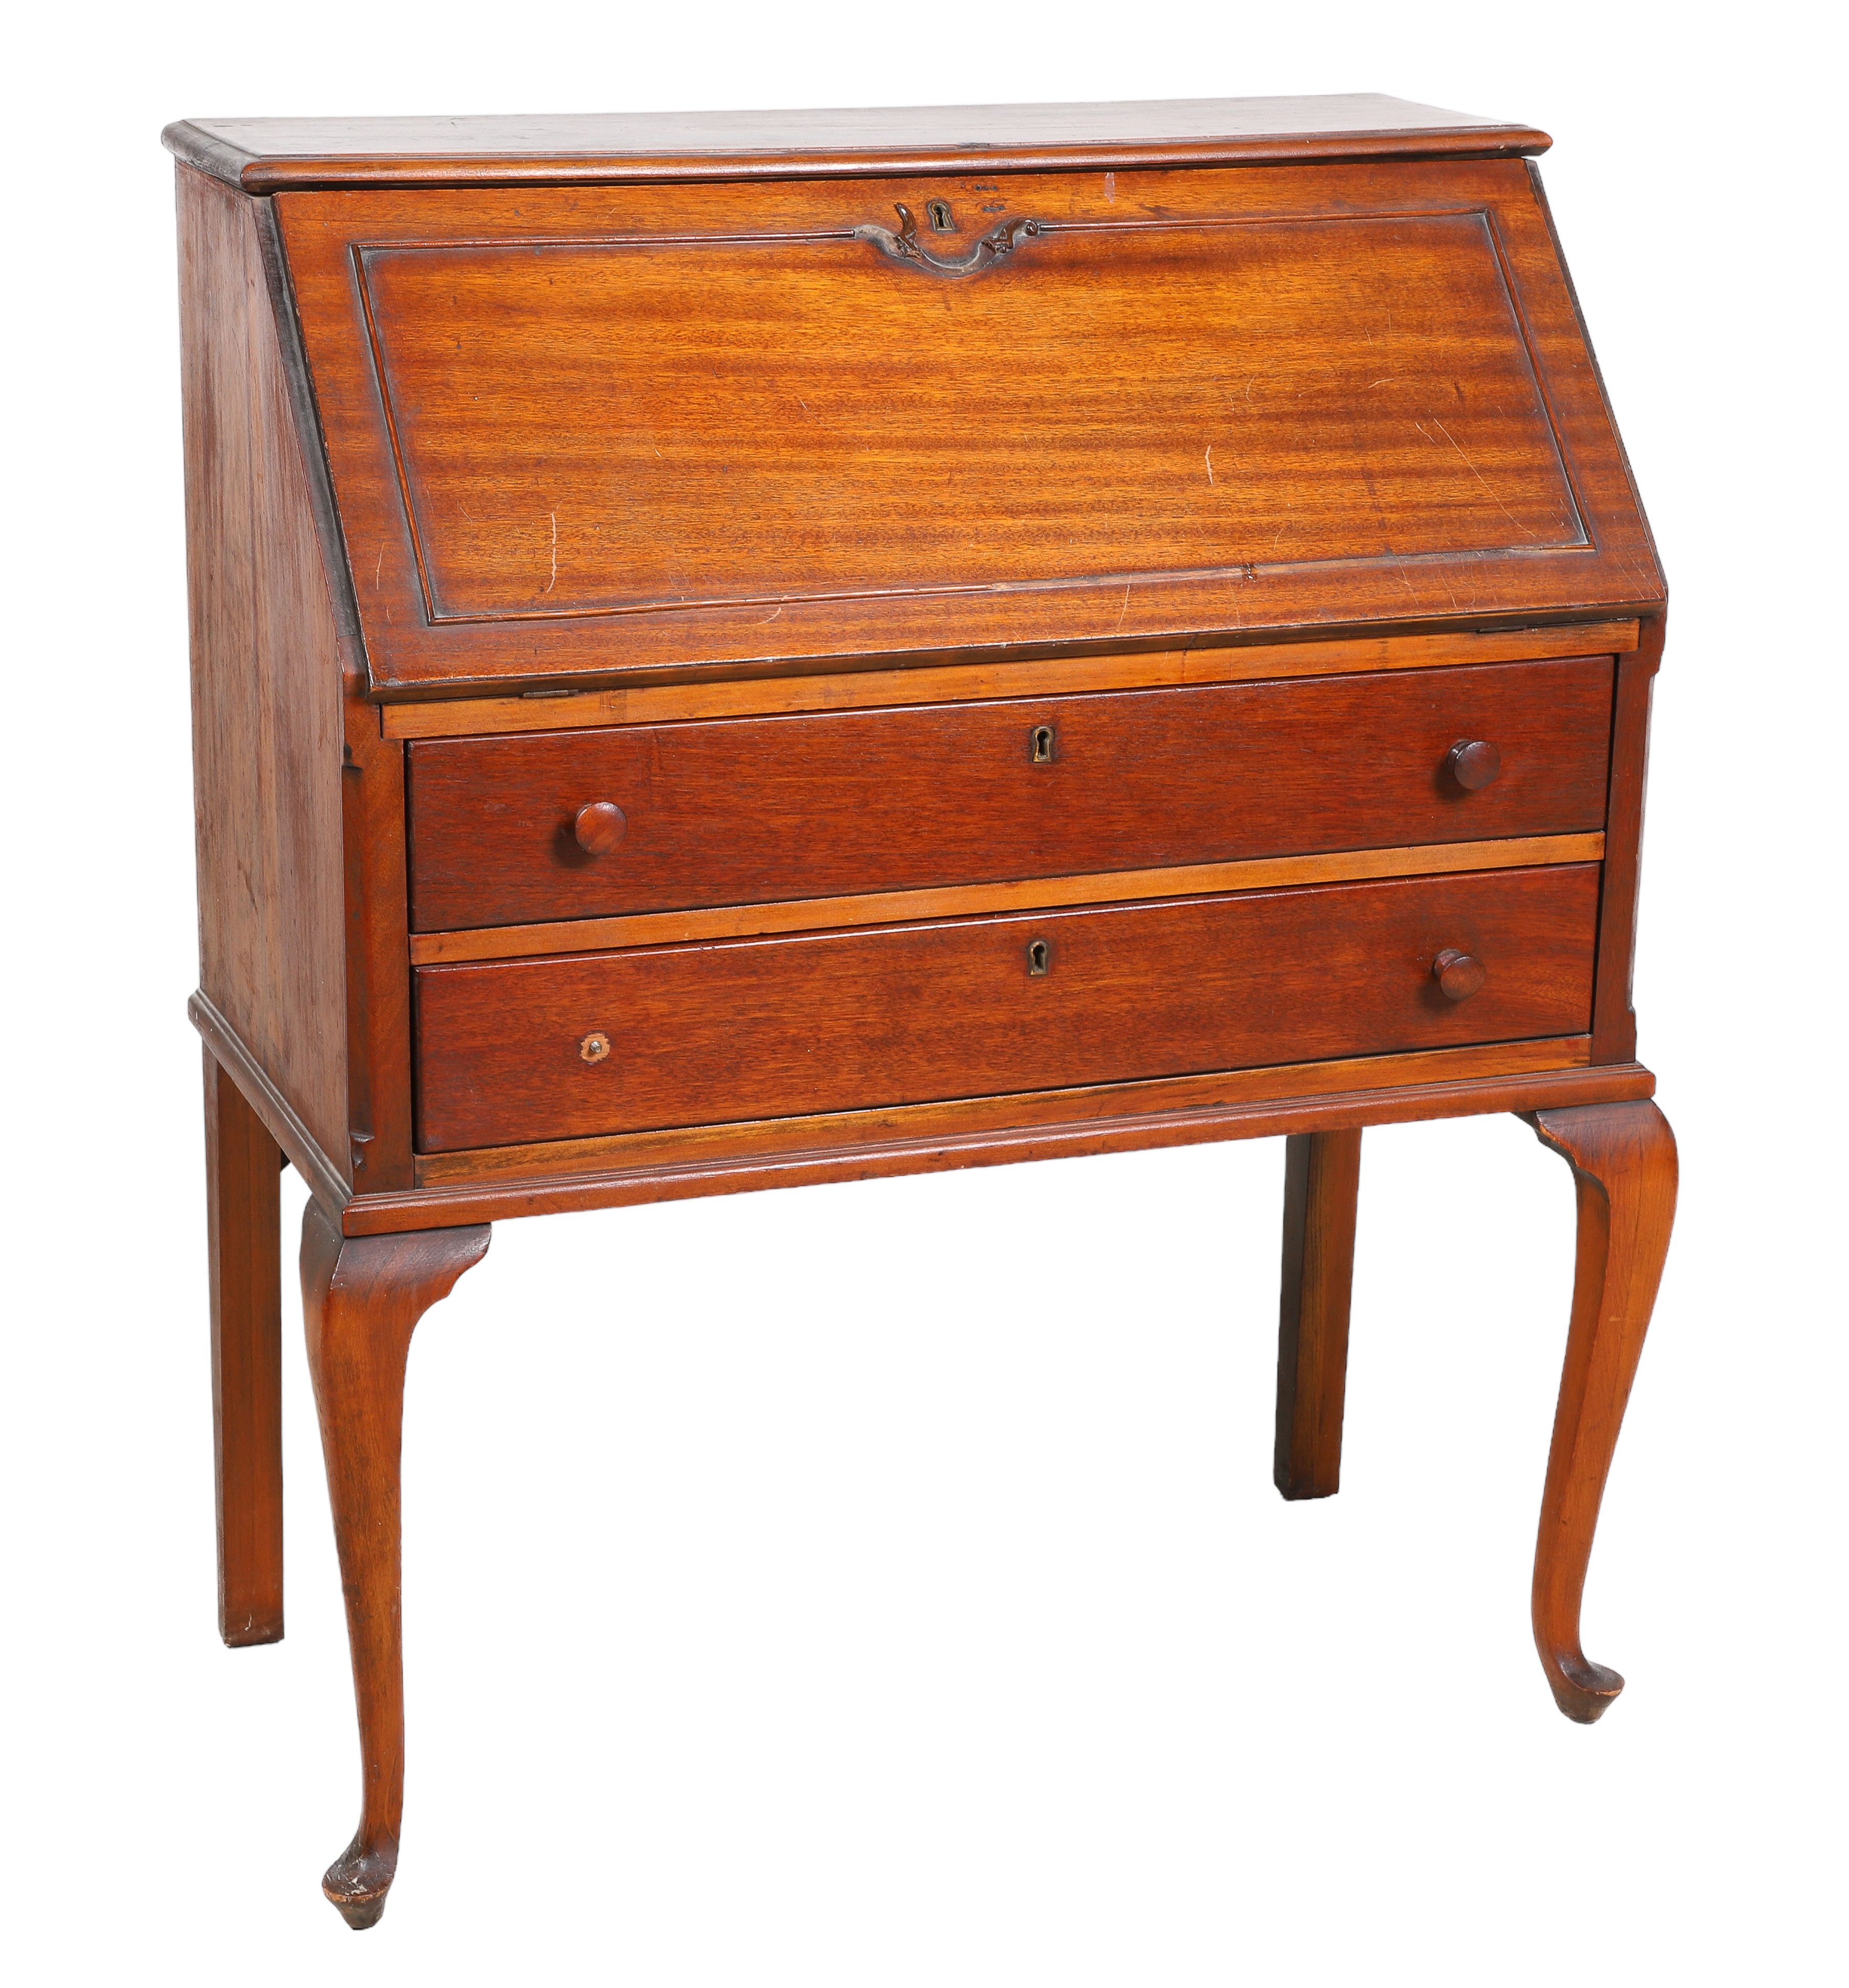 Queen Anne style mahogany slant front